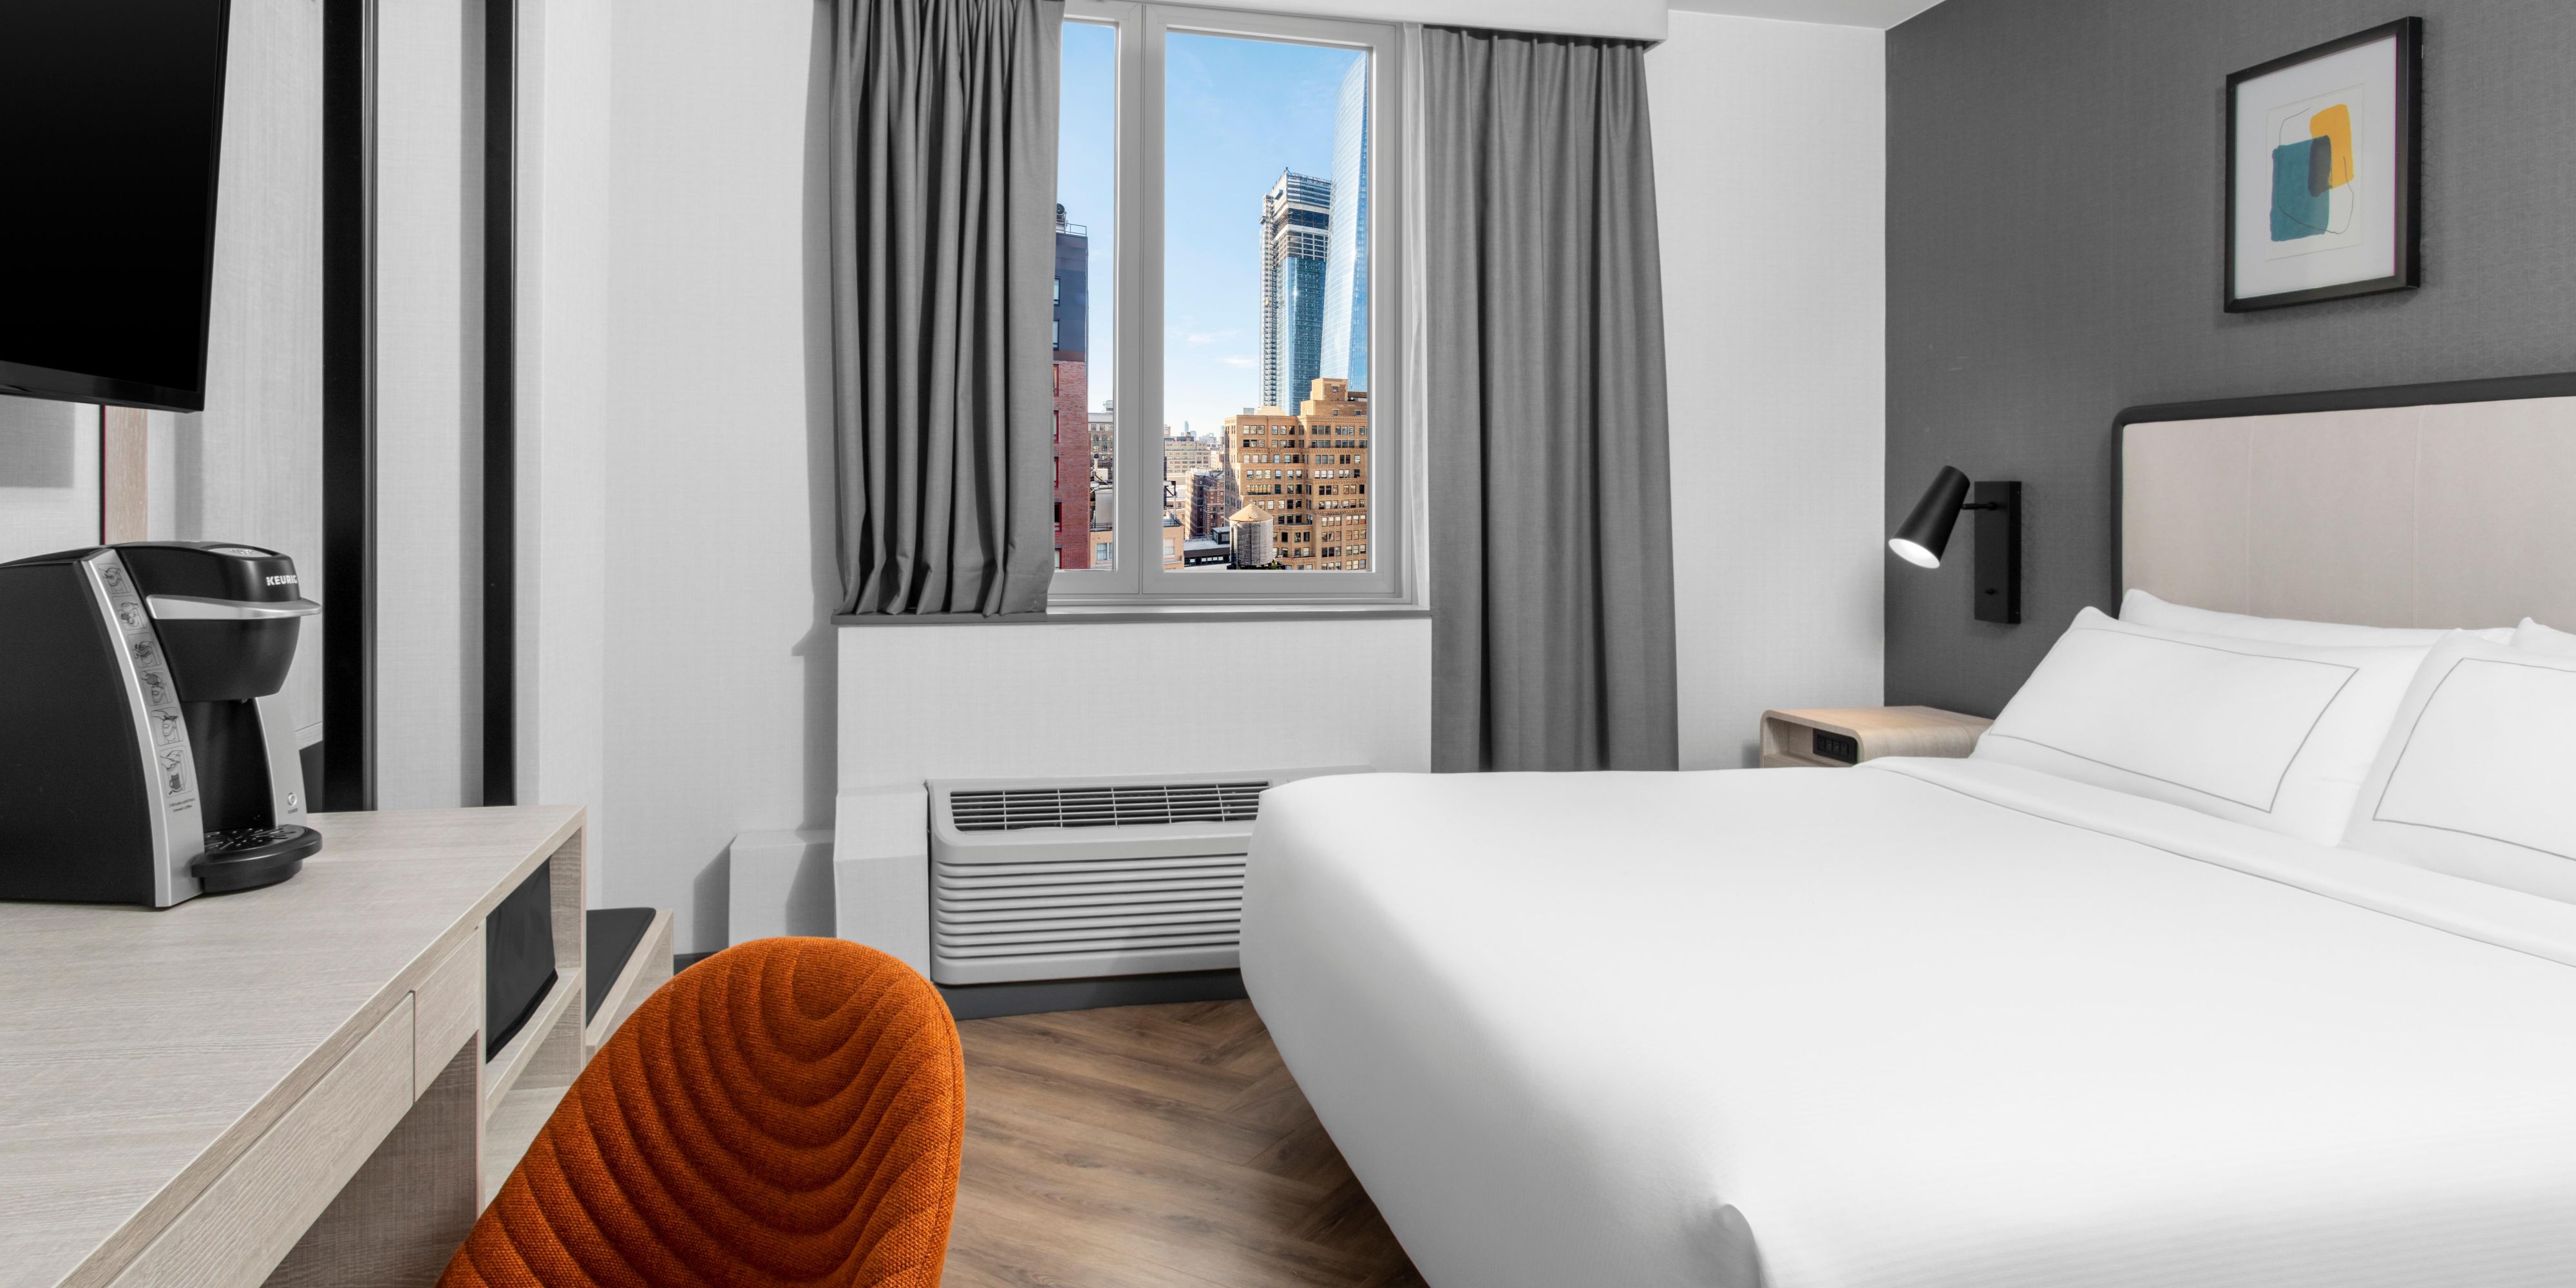 Book a City View room for iconic views of the Manhattan skyline.